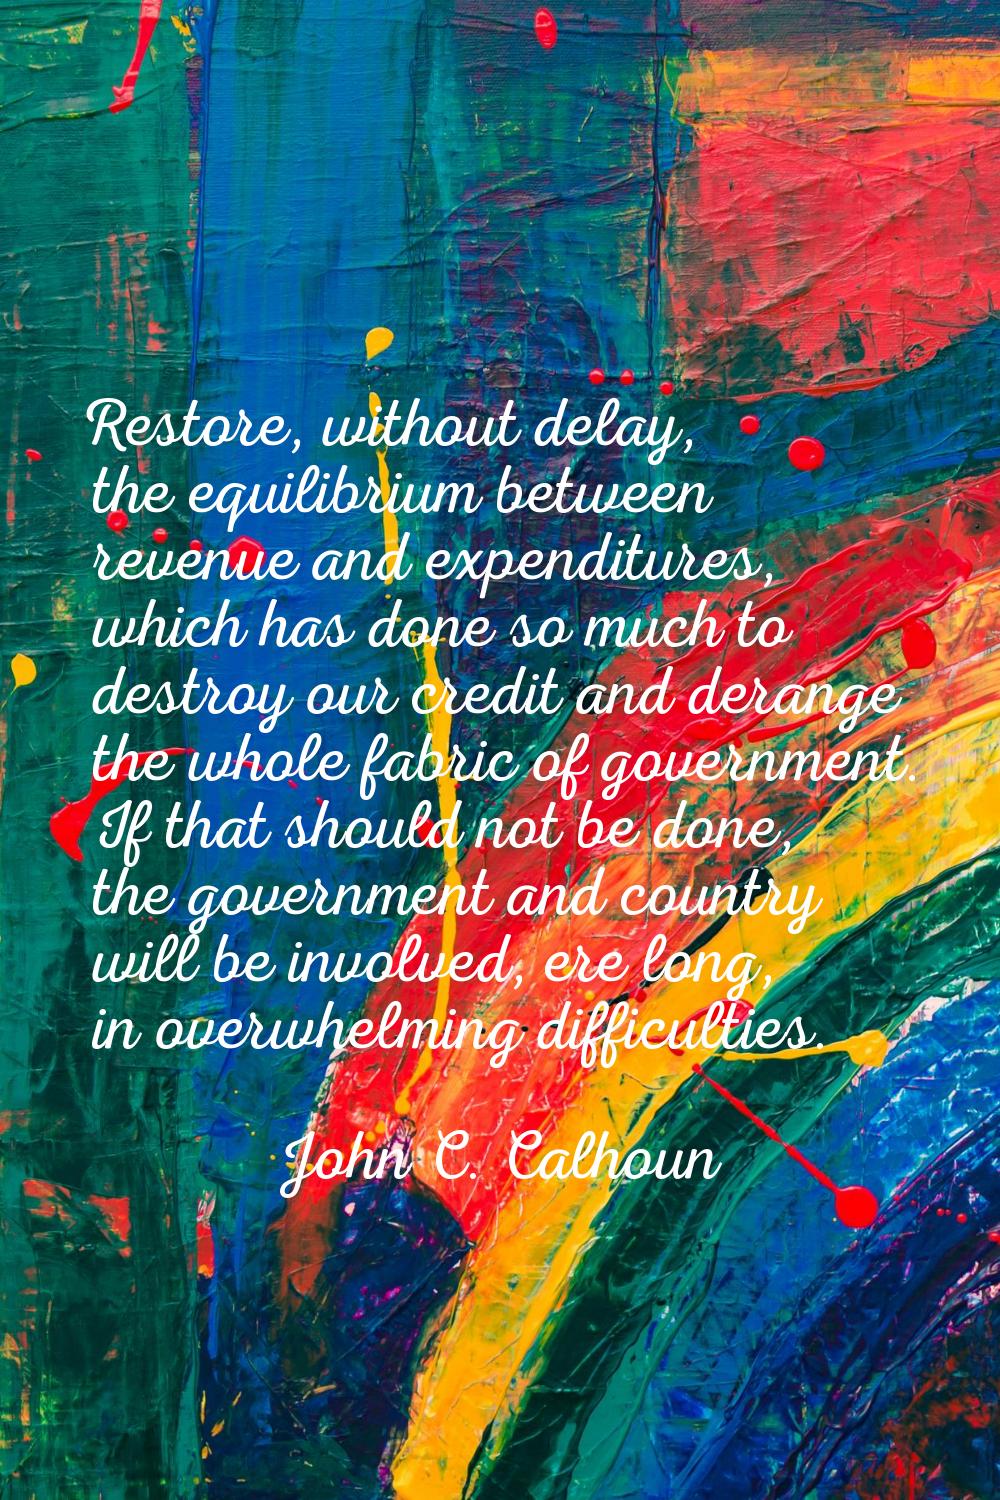 Restore, without delay, the equilibrium between revenue and expenditures, which has done so much to